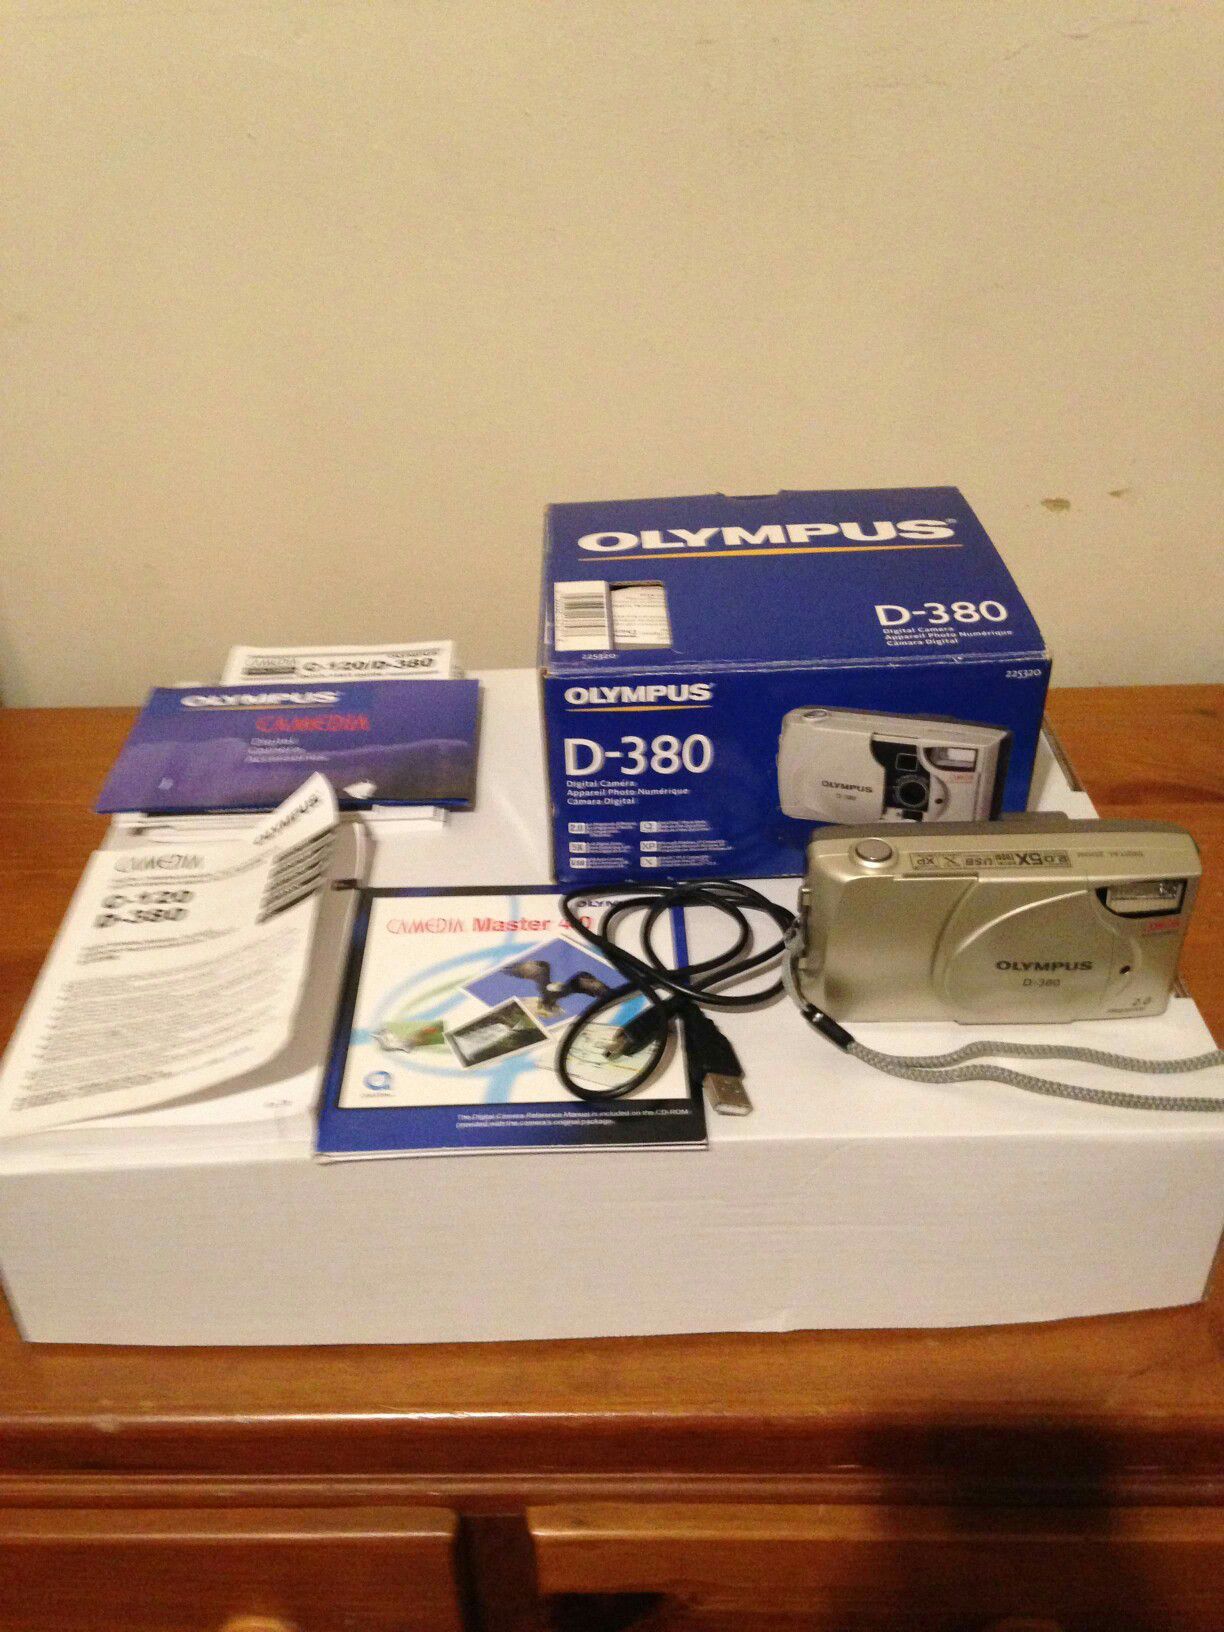 Olympus D380 Digital Camera with USB cable, SD Card, Box